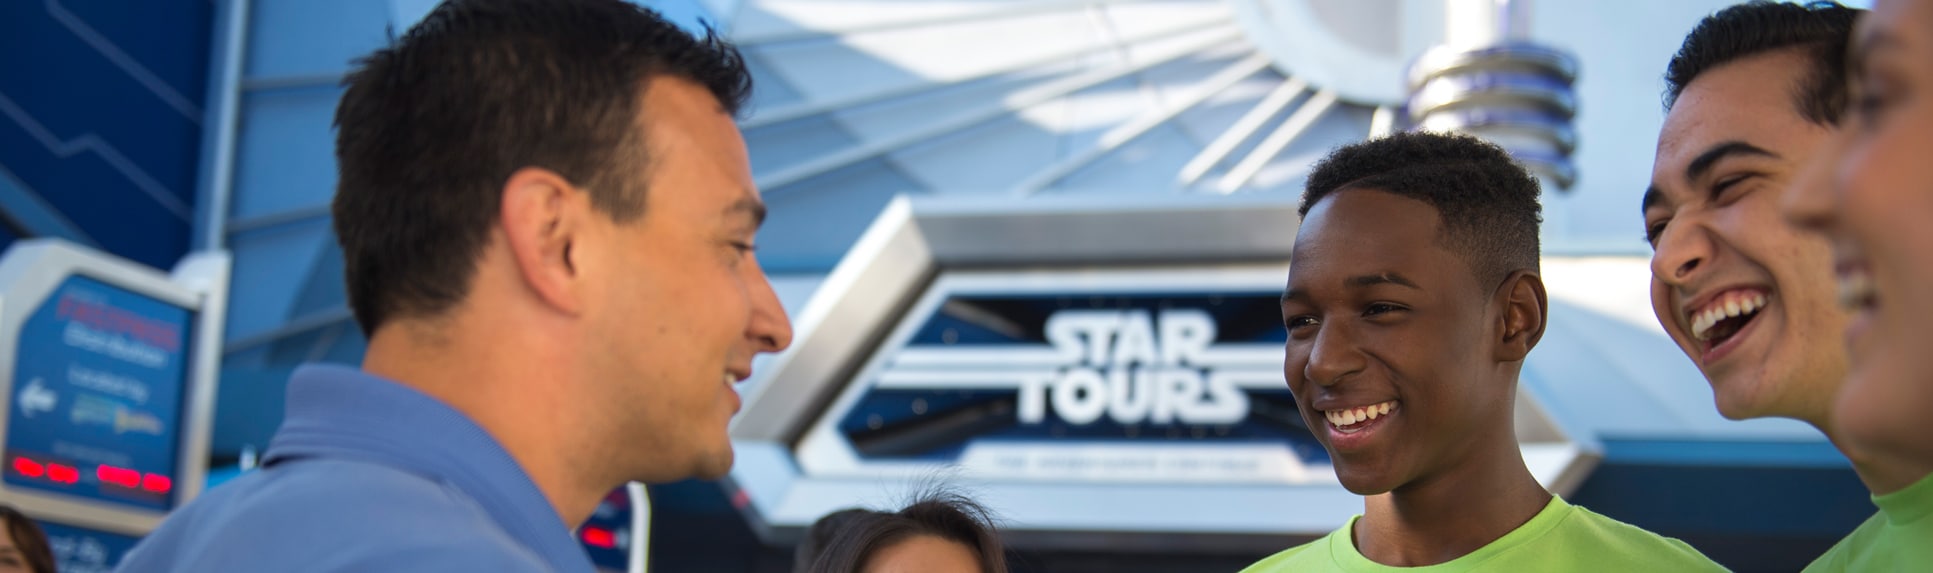 Two boys share a laugh with an adult by the Star Tours attraction